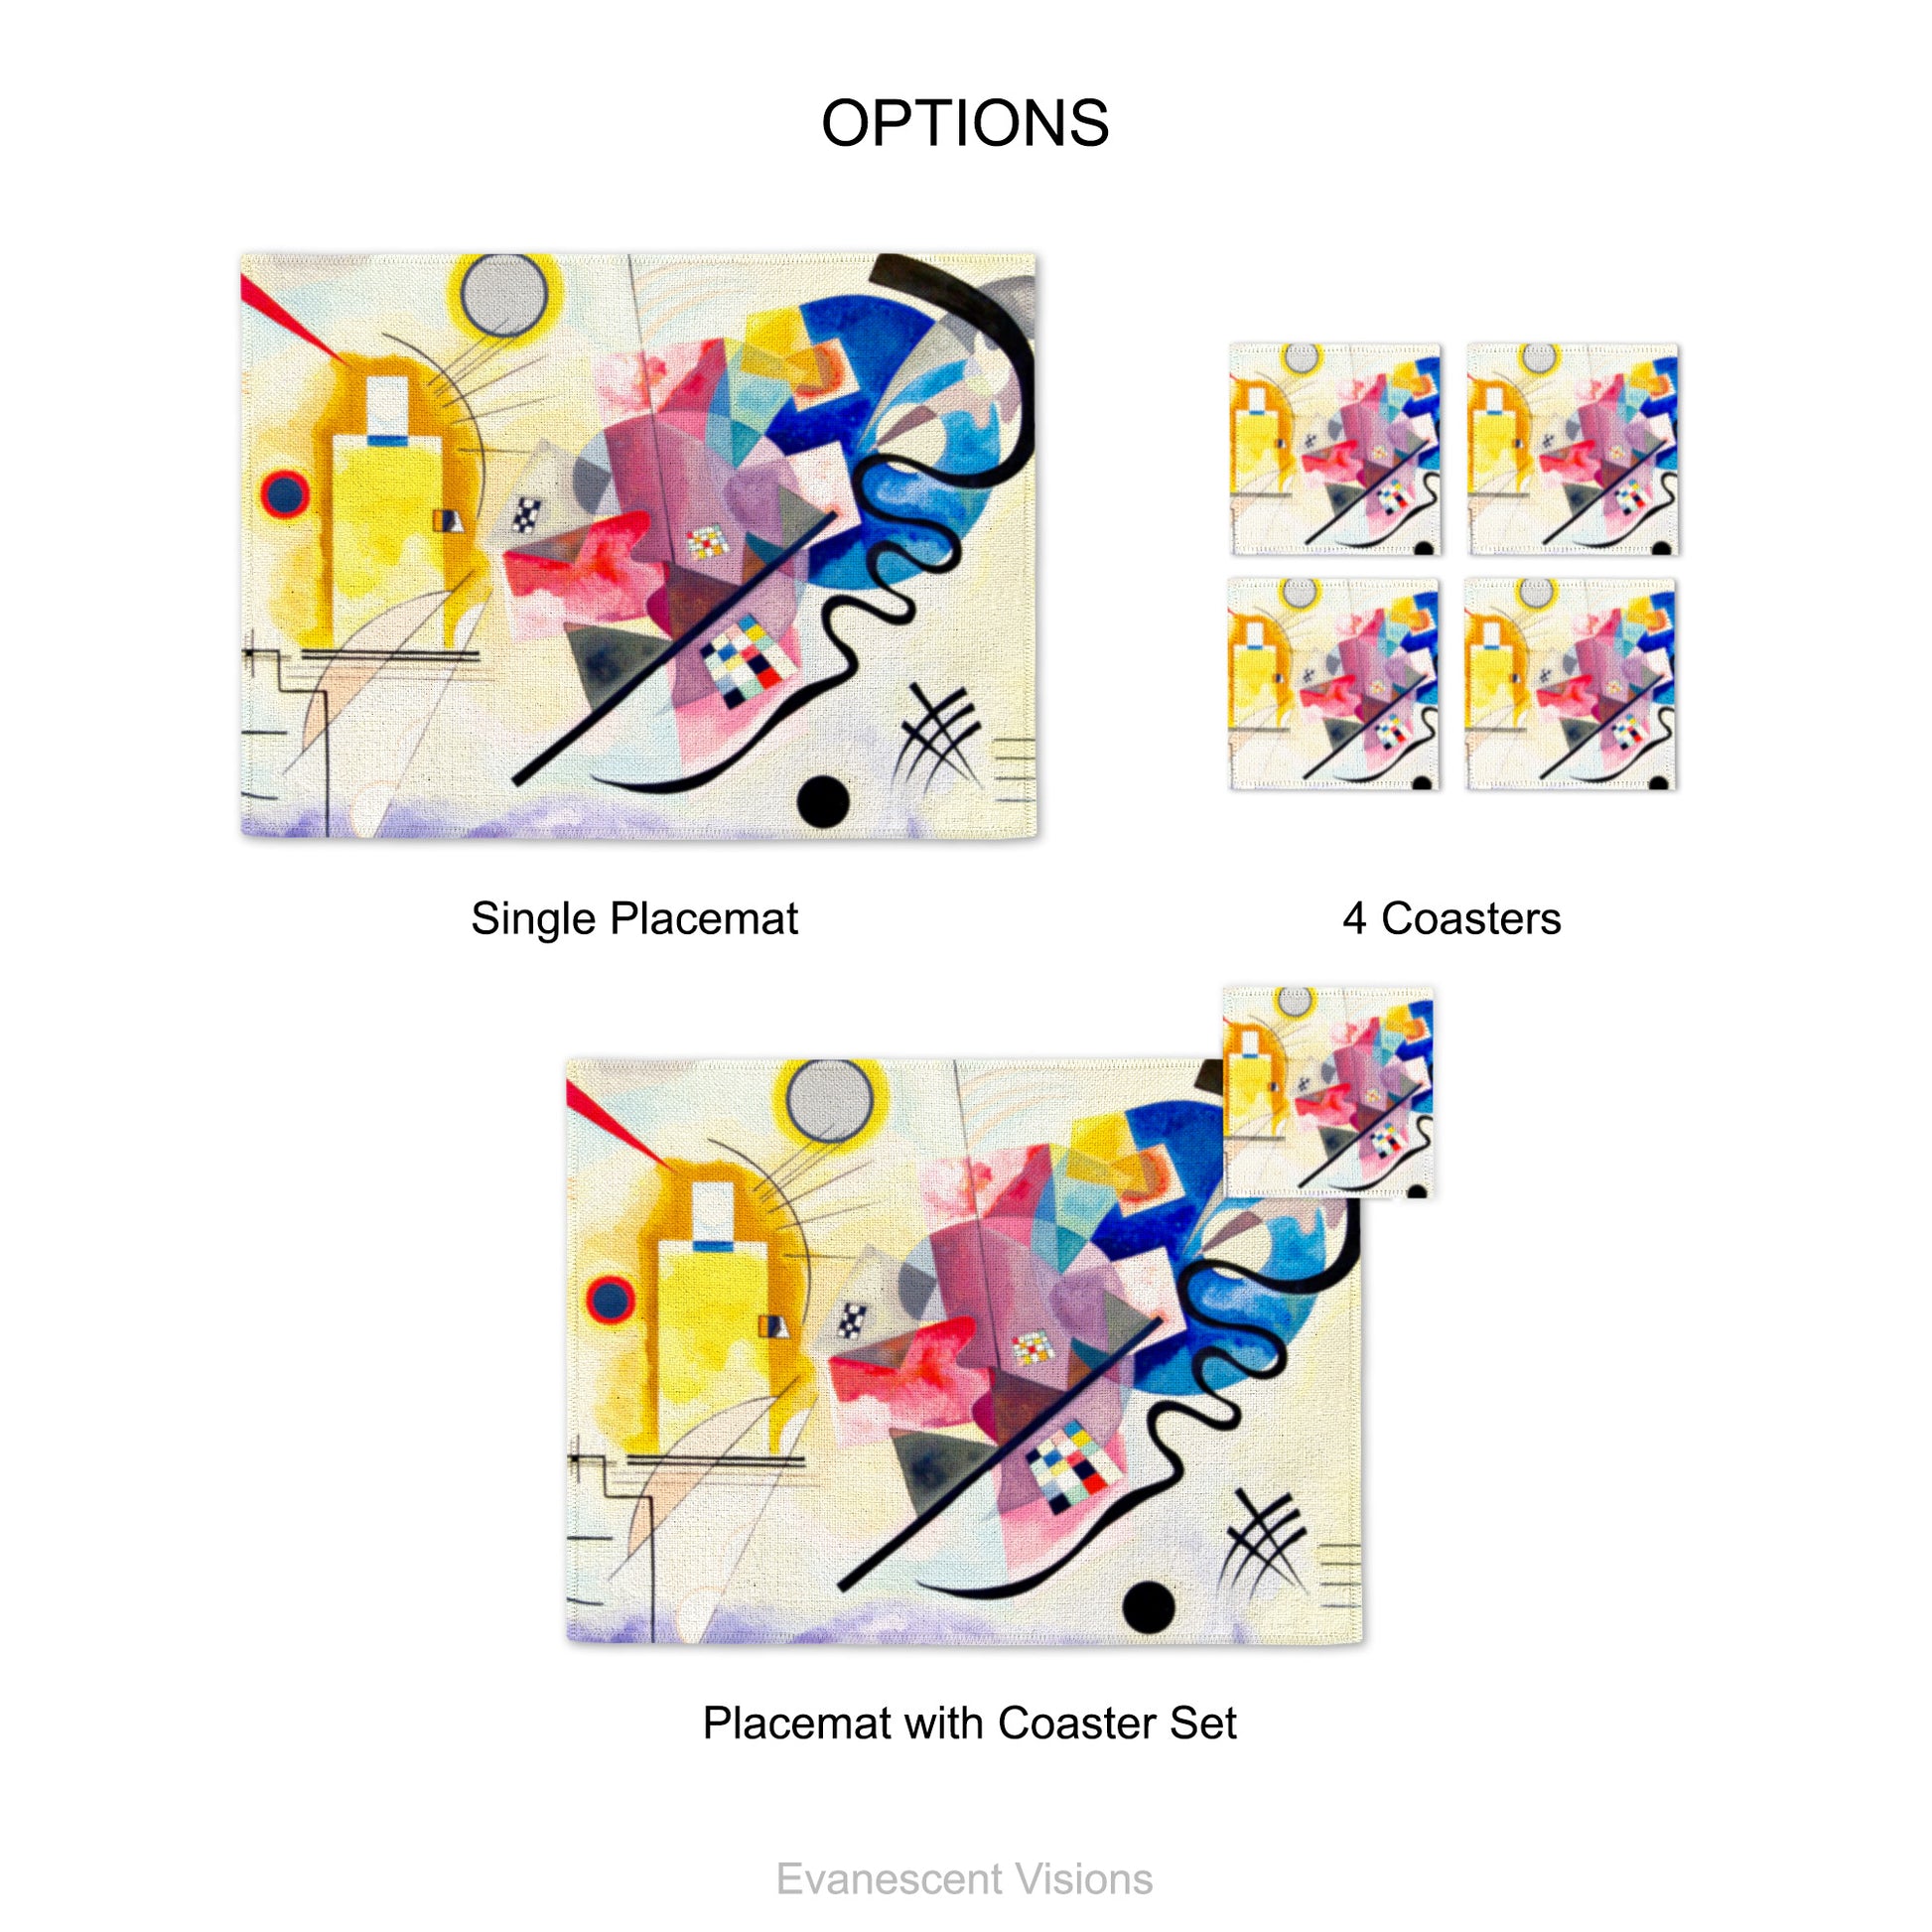 Product options shows single placemat, set of 4 coasters and placemat with coaster set. The design is based on the artwork 'Jaune, Rouge, Bleu' by artist Wassily Kandinsky (1866-1944)